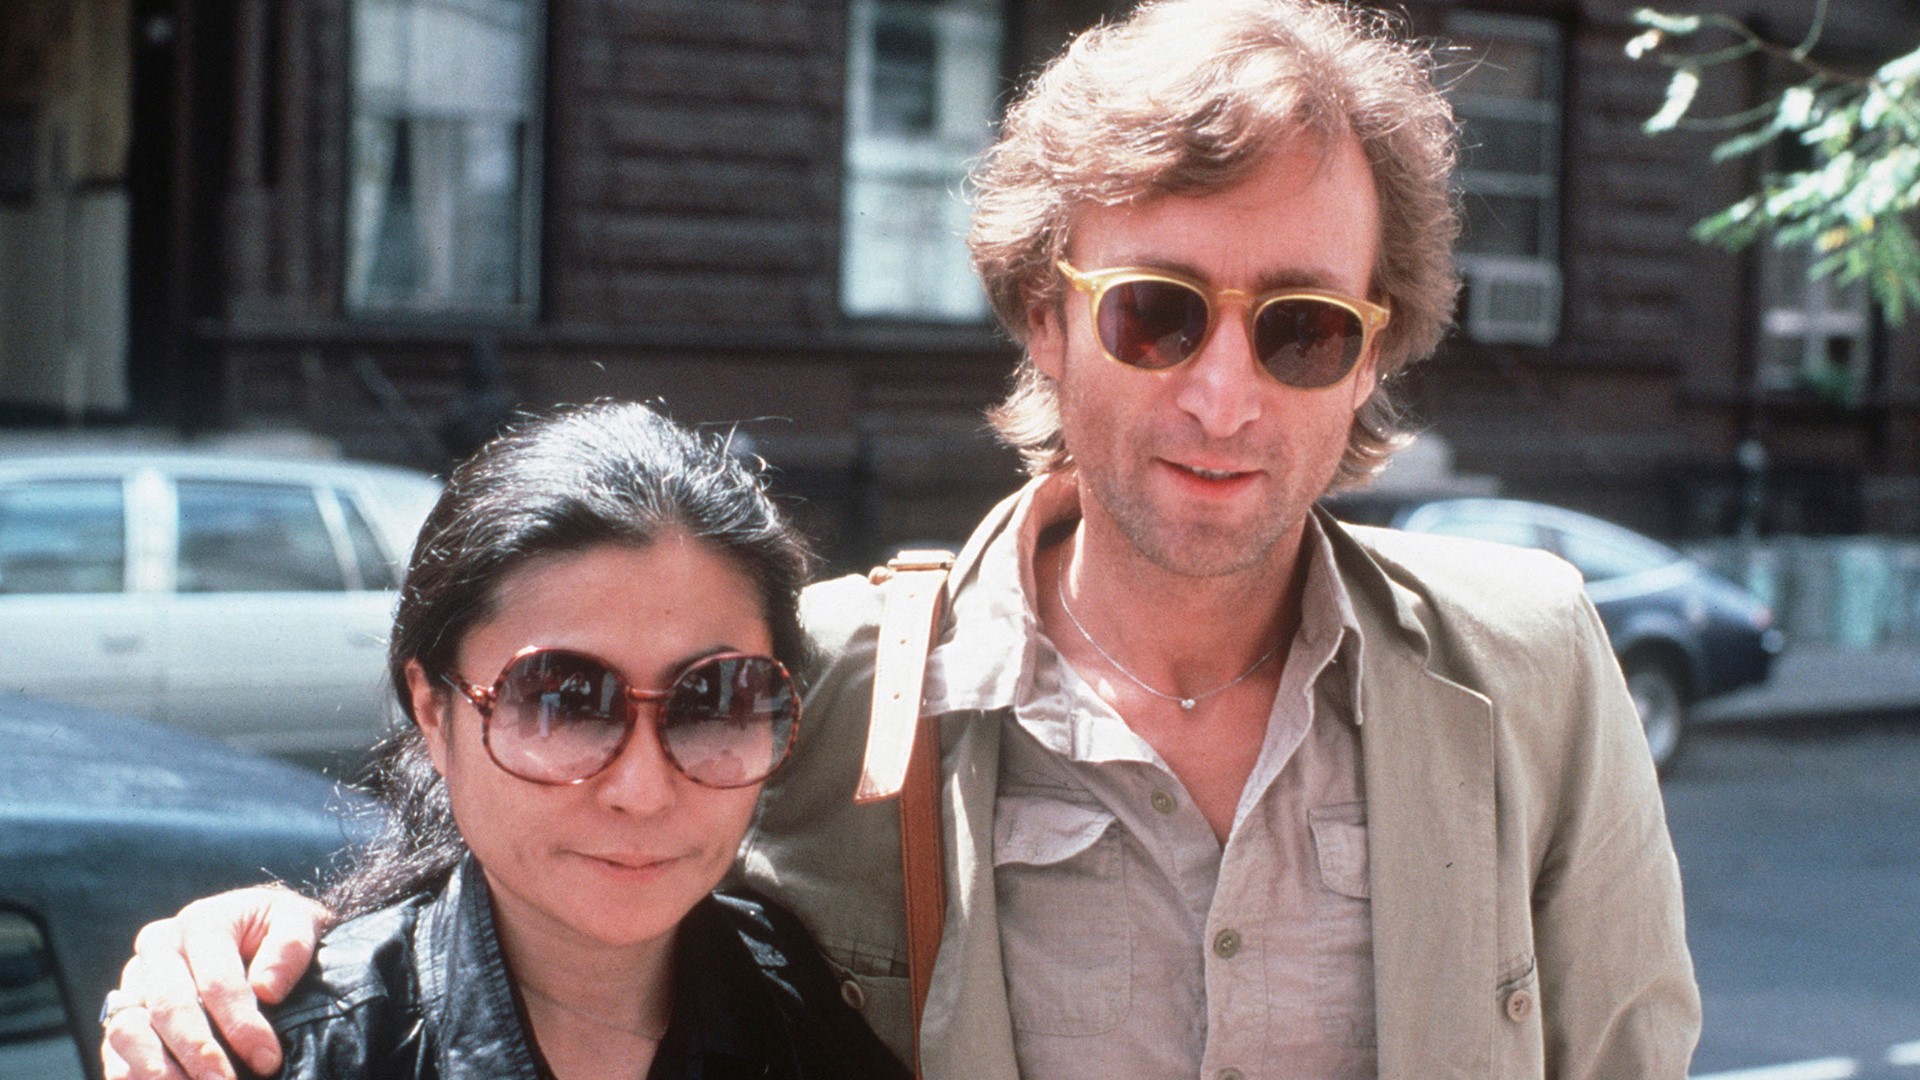 New book John Lennon: 1980 Playlist takes a look at the music he was listening to during "the year of his recreative birth" and how it impacted his life.